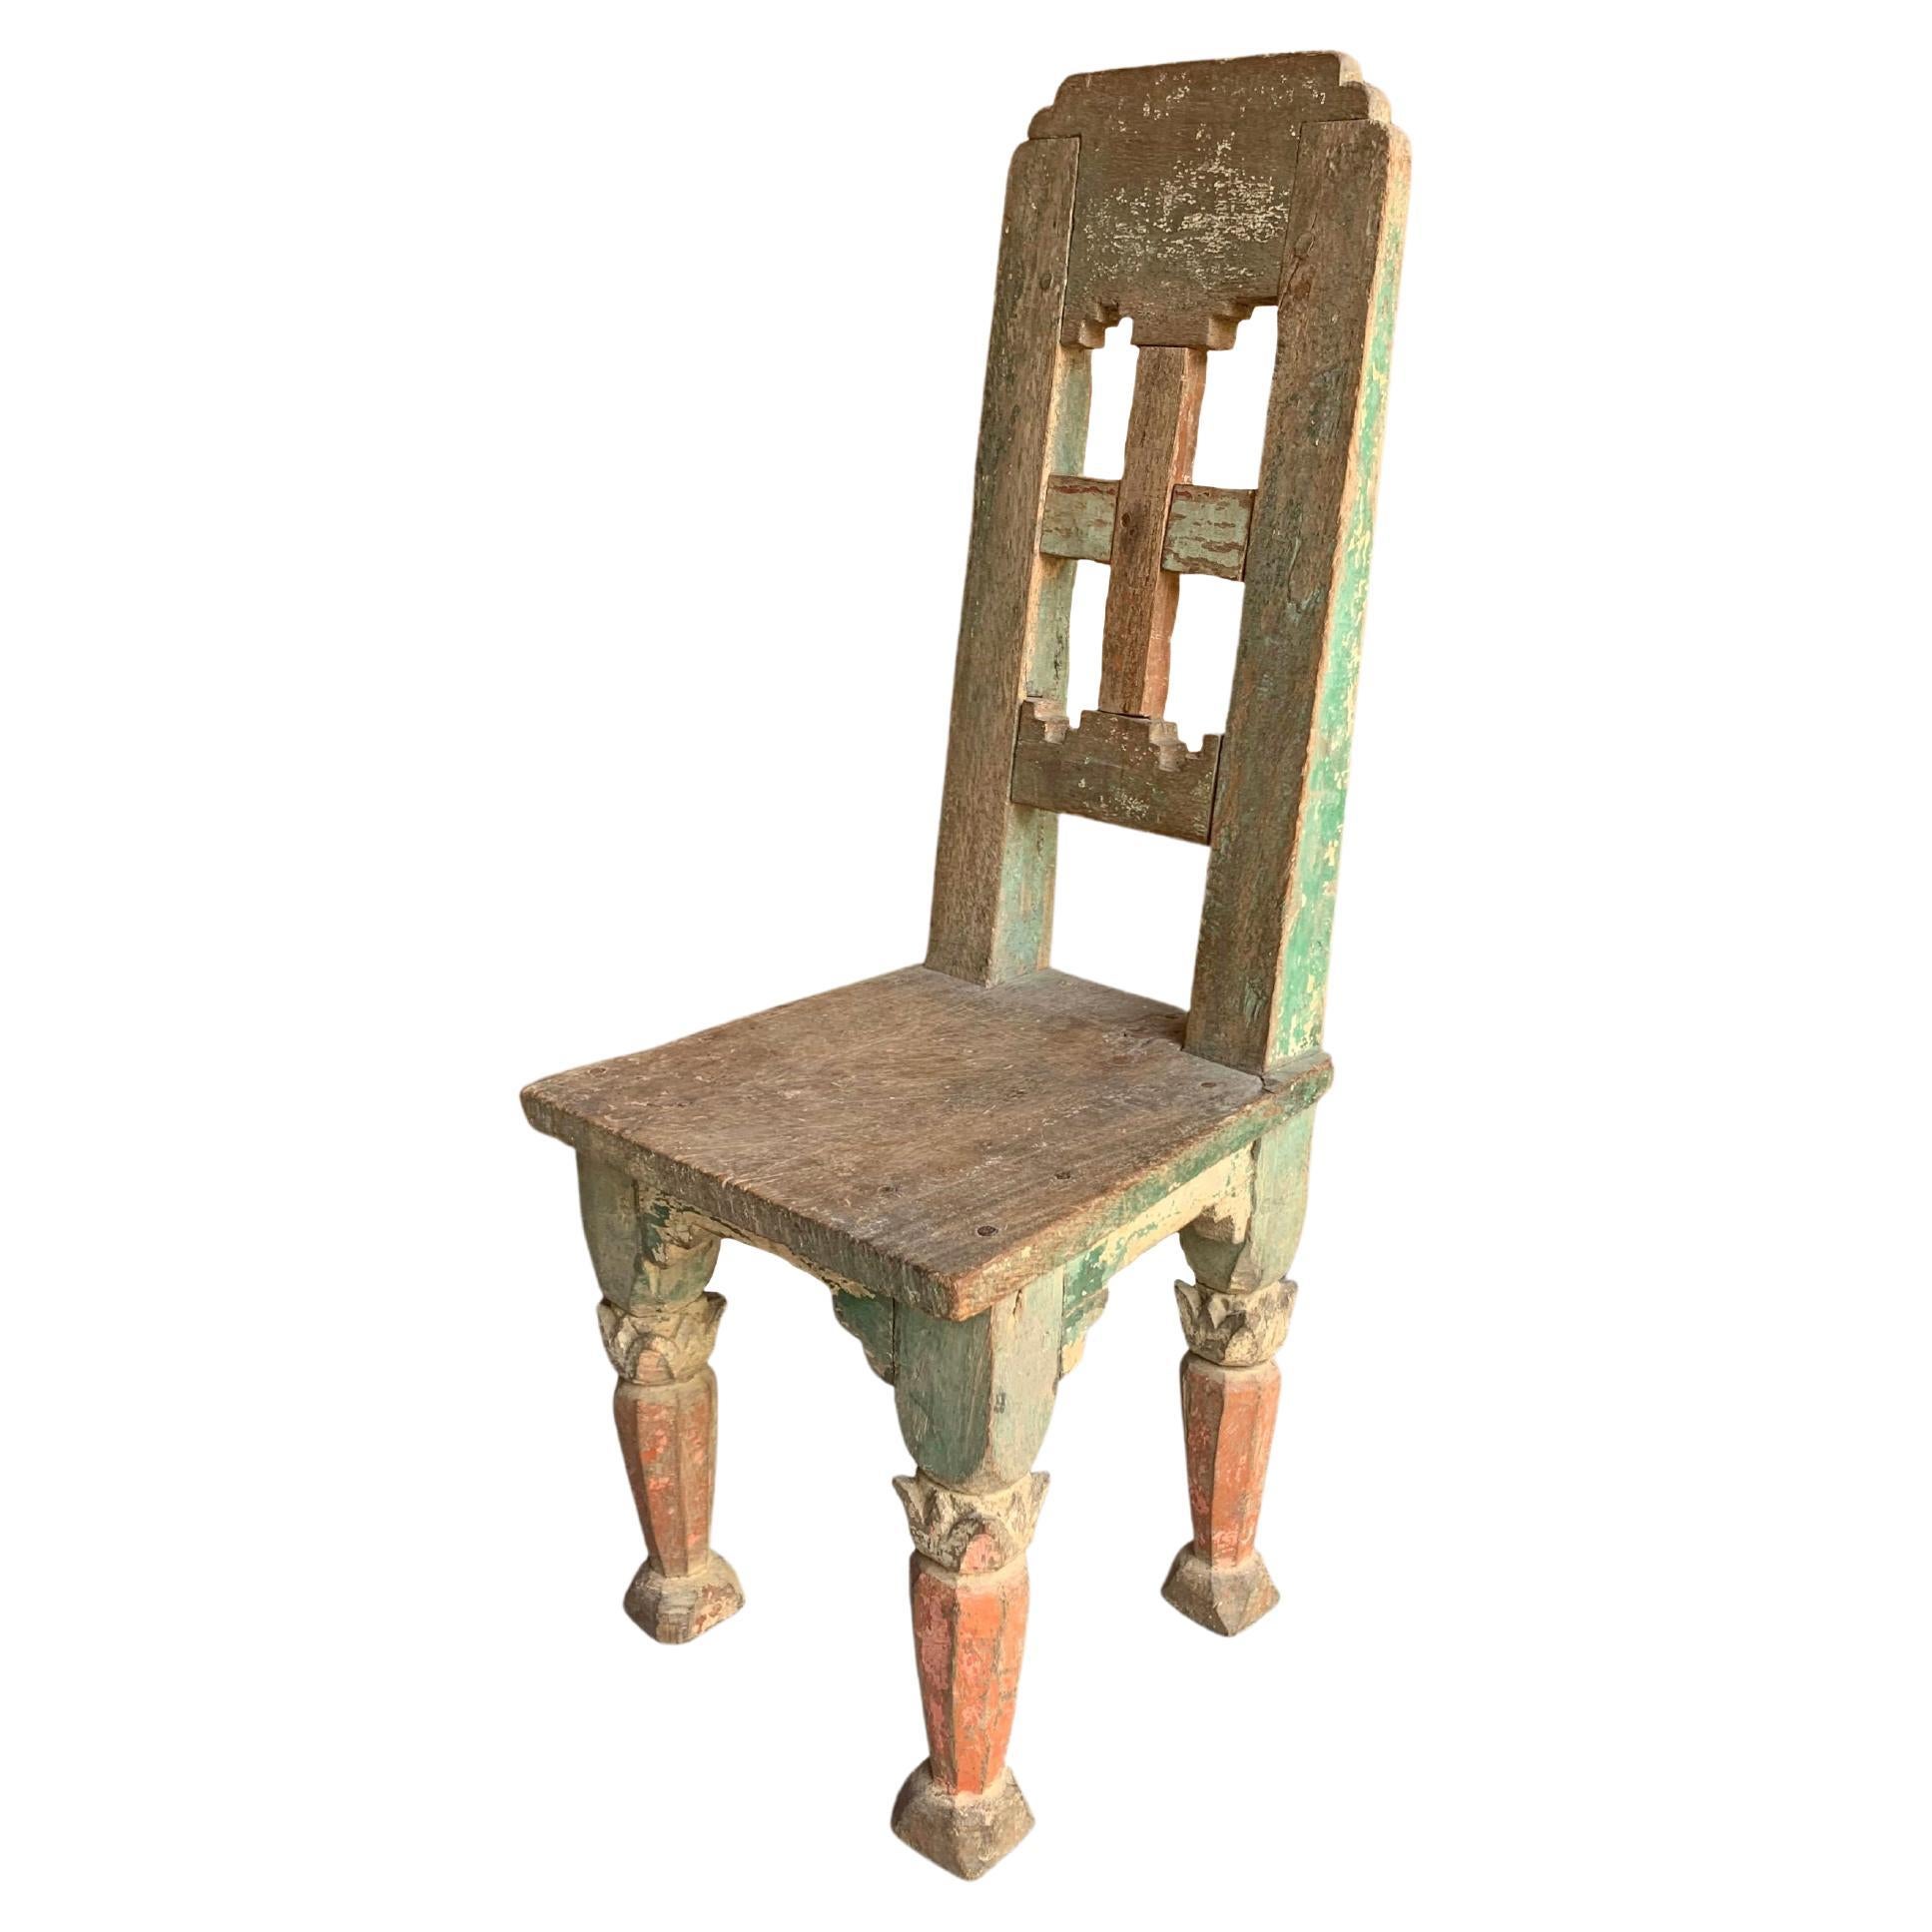 Wooden Tobacco Plantation Mini Chair, Java, Indonesia, c. 1900 For Sale